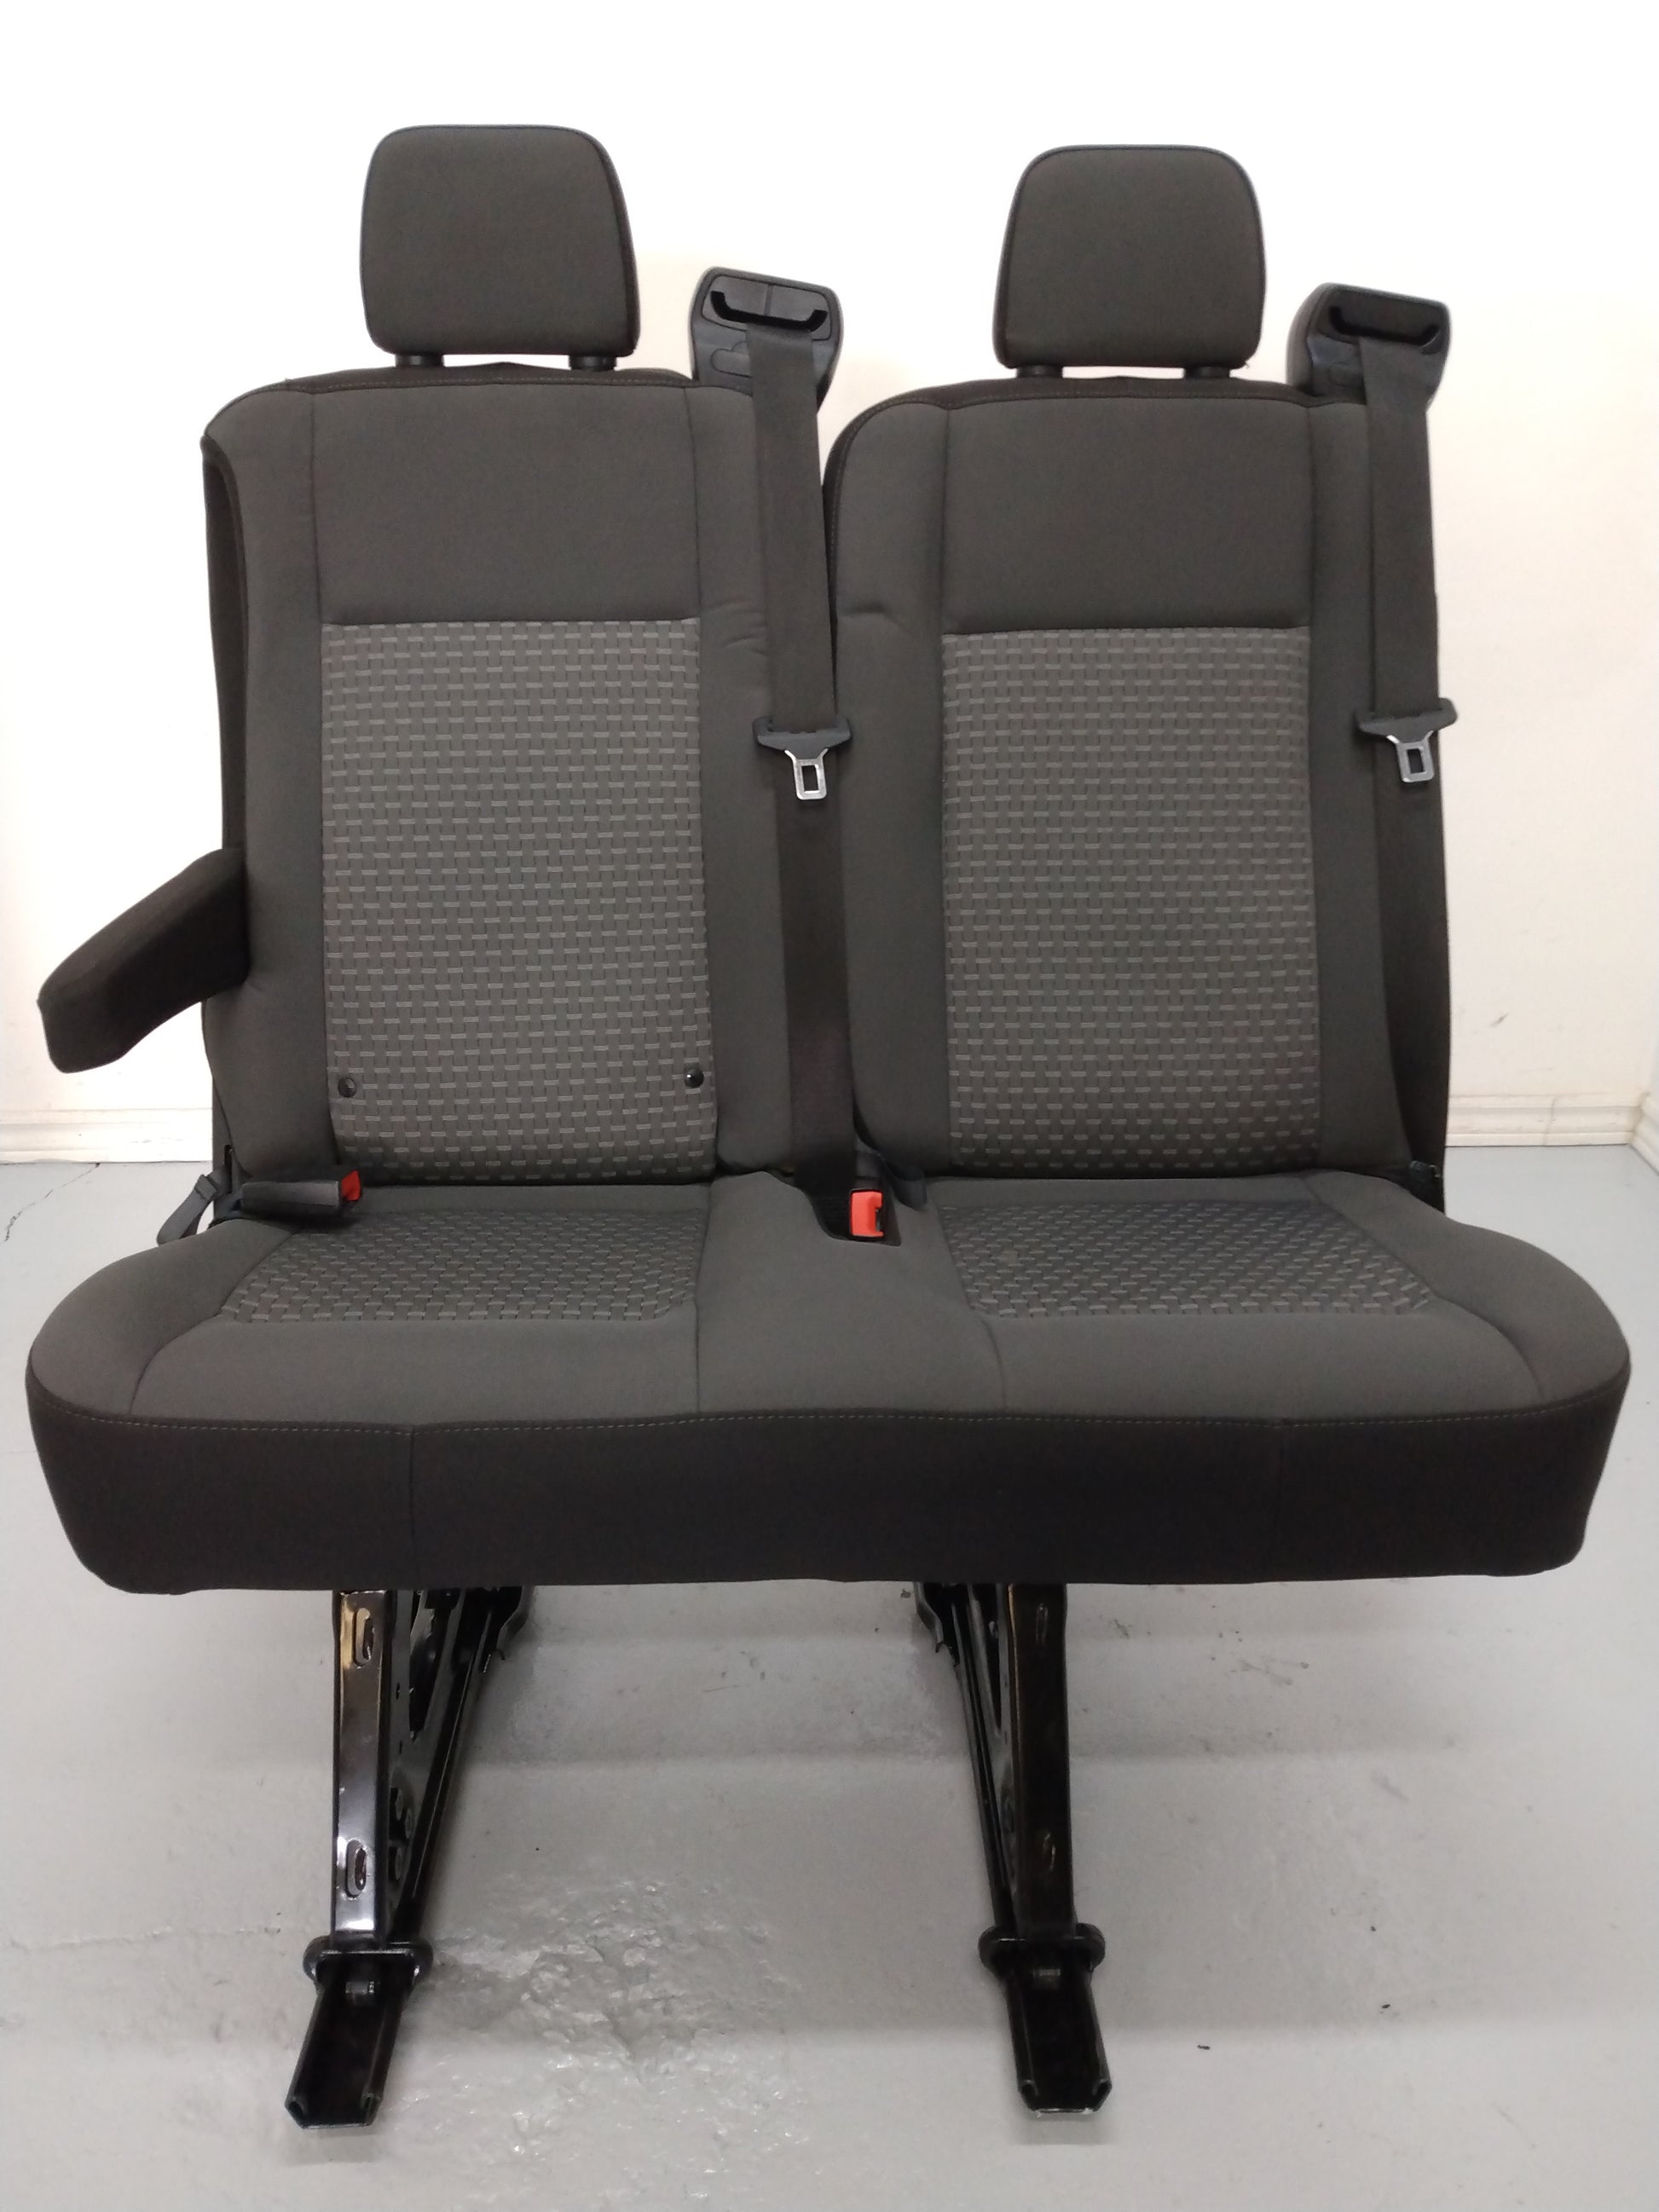 Ford Transit van 2022 black cloth 36" wide left side  2 position bench seat with mounts. with recline and armrest | removable quick release universal fit